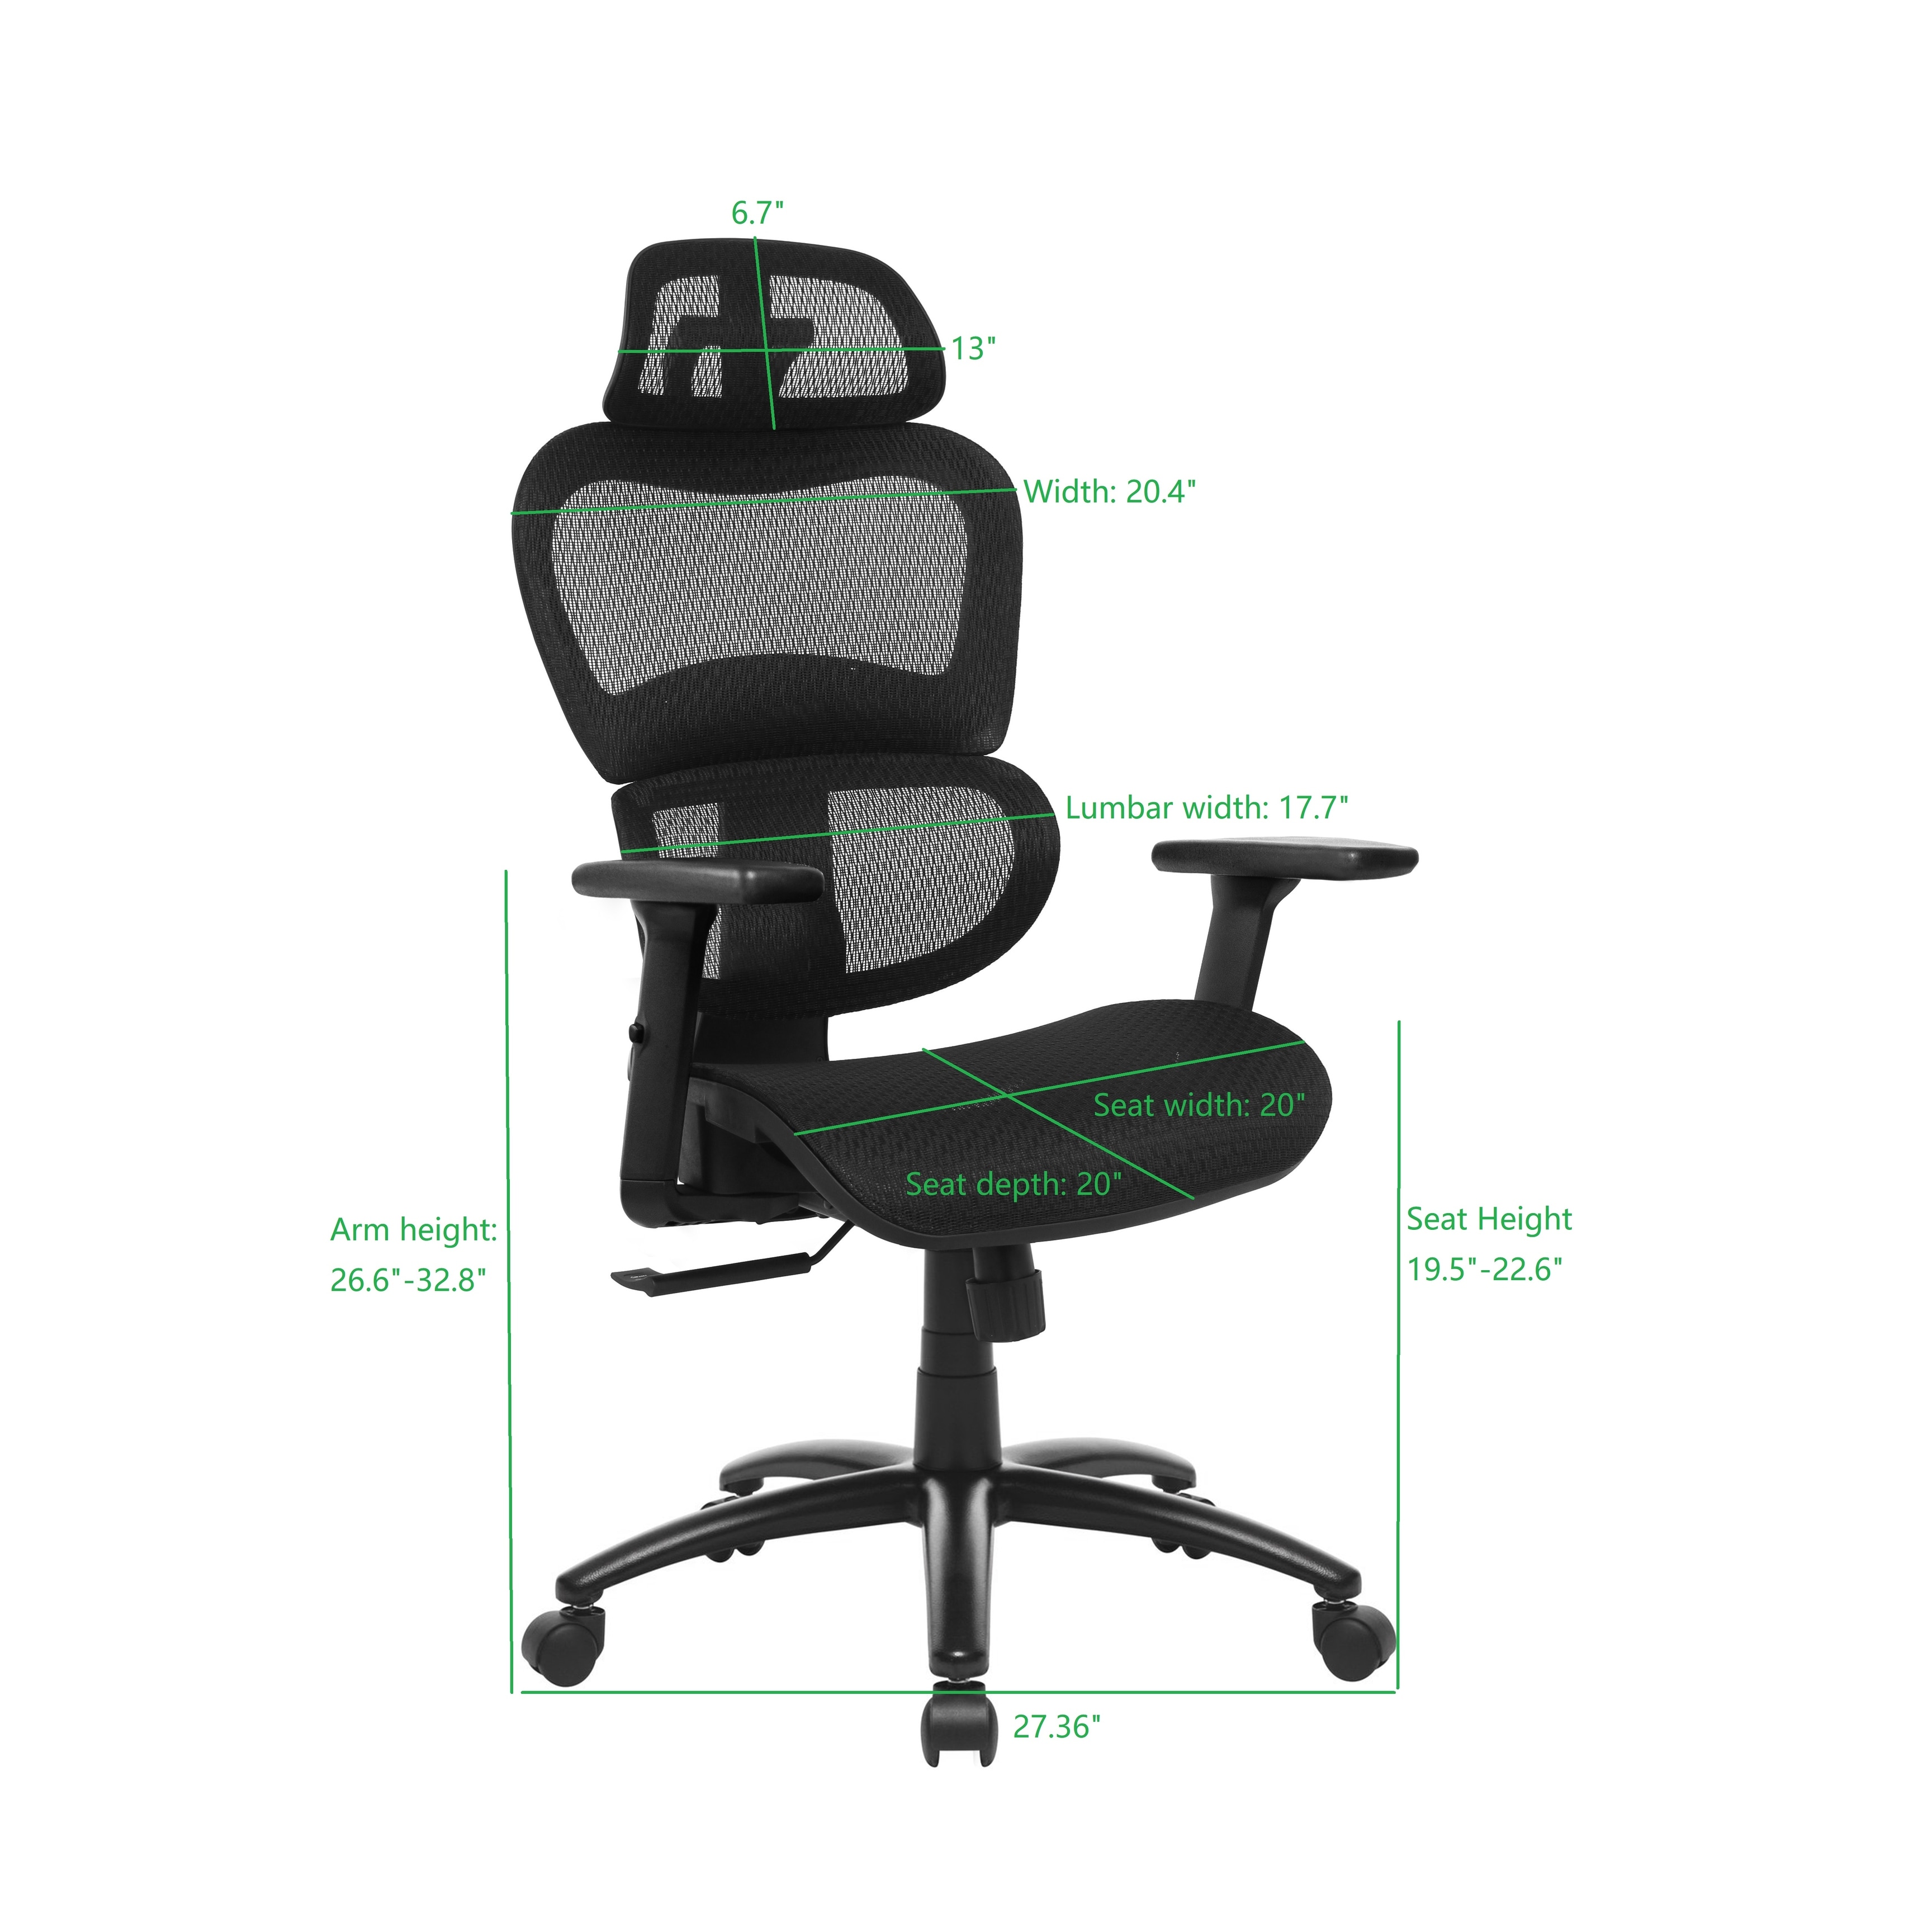 https://ak1.ostkcdn.com/images/products/is/images/direct/3ae482255d6076b0989642e984f2817d76b434ea/Ergonomic-Office-Chair%2C-High-Back-Mesh-Chair-Computer-Desk-Chair-with-Lumbar-Support-and-3D-Adjustable-Headrest-and-Armrests.jpg